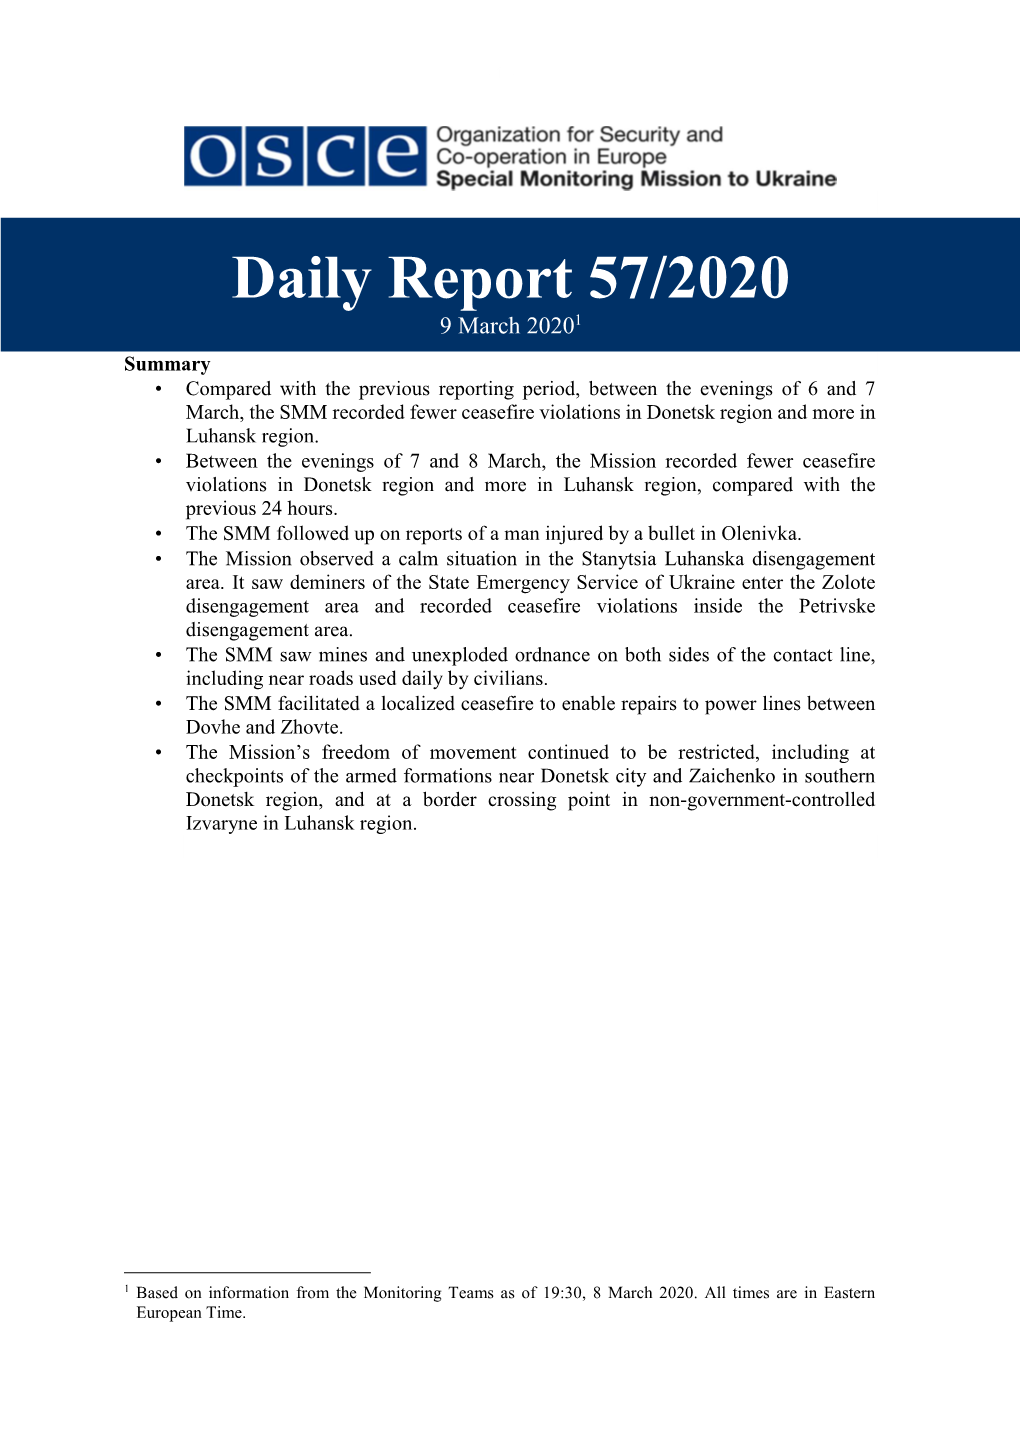 2020-03-09 Daily Report